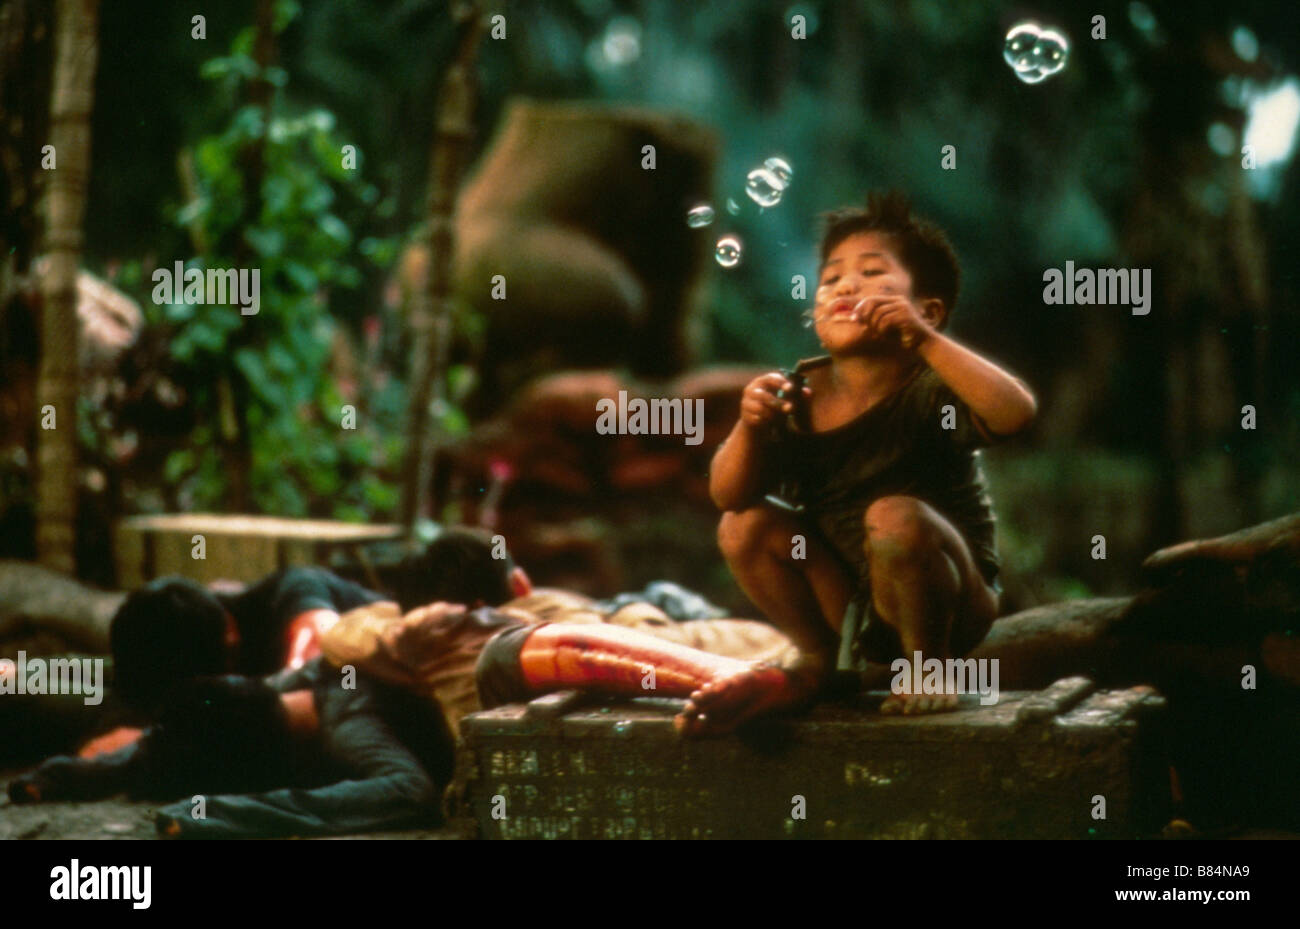 Apocalypse Now  Year: 1979 - USA Director: Francis Ford Coppola Palme d'or of the 1979 Cannes Film Festival Stock Photo